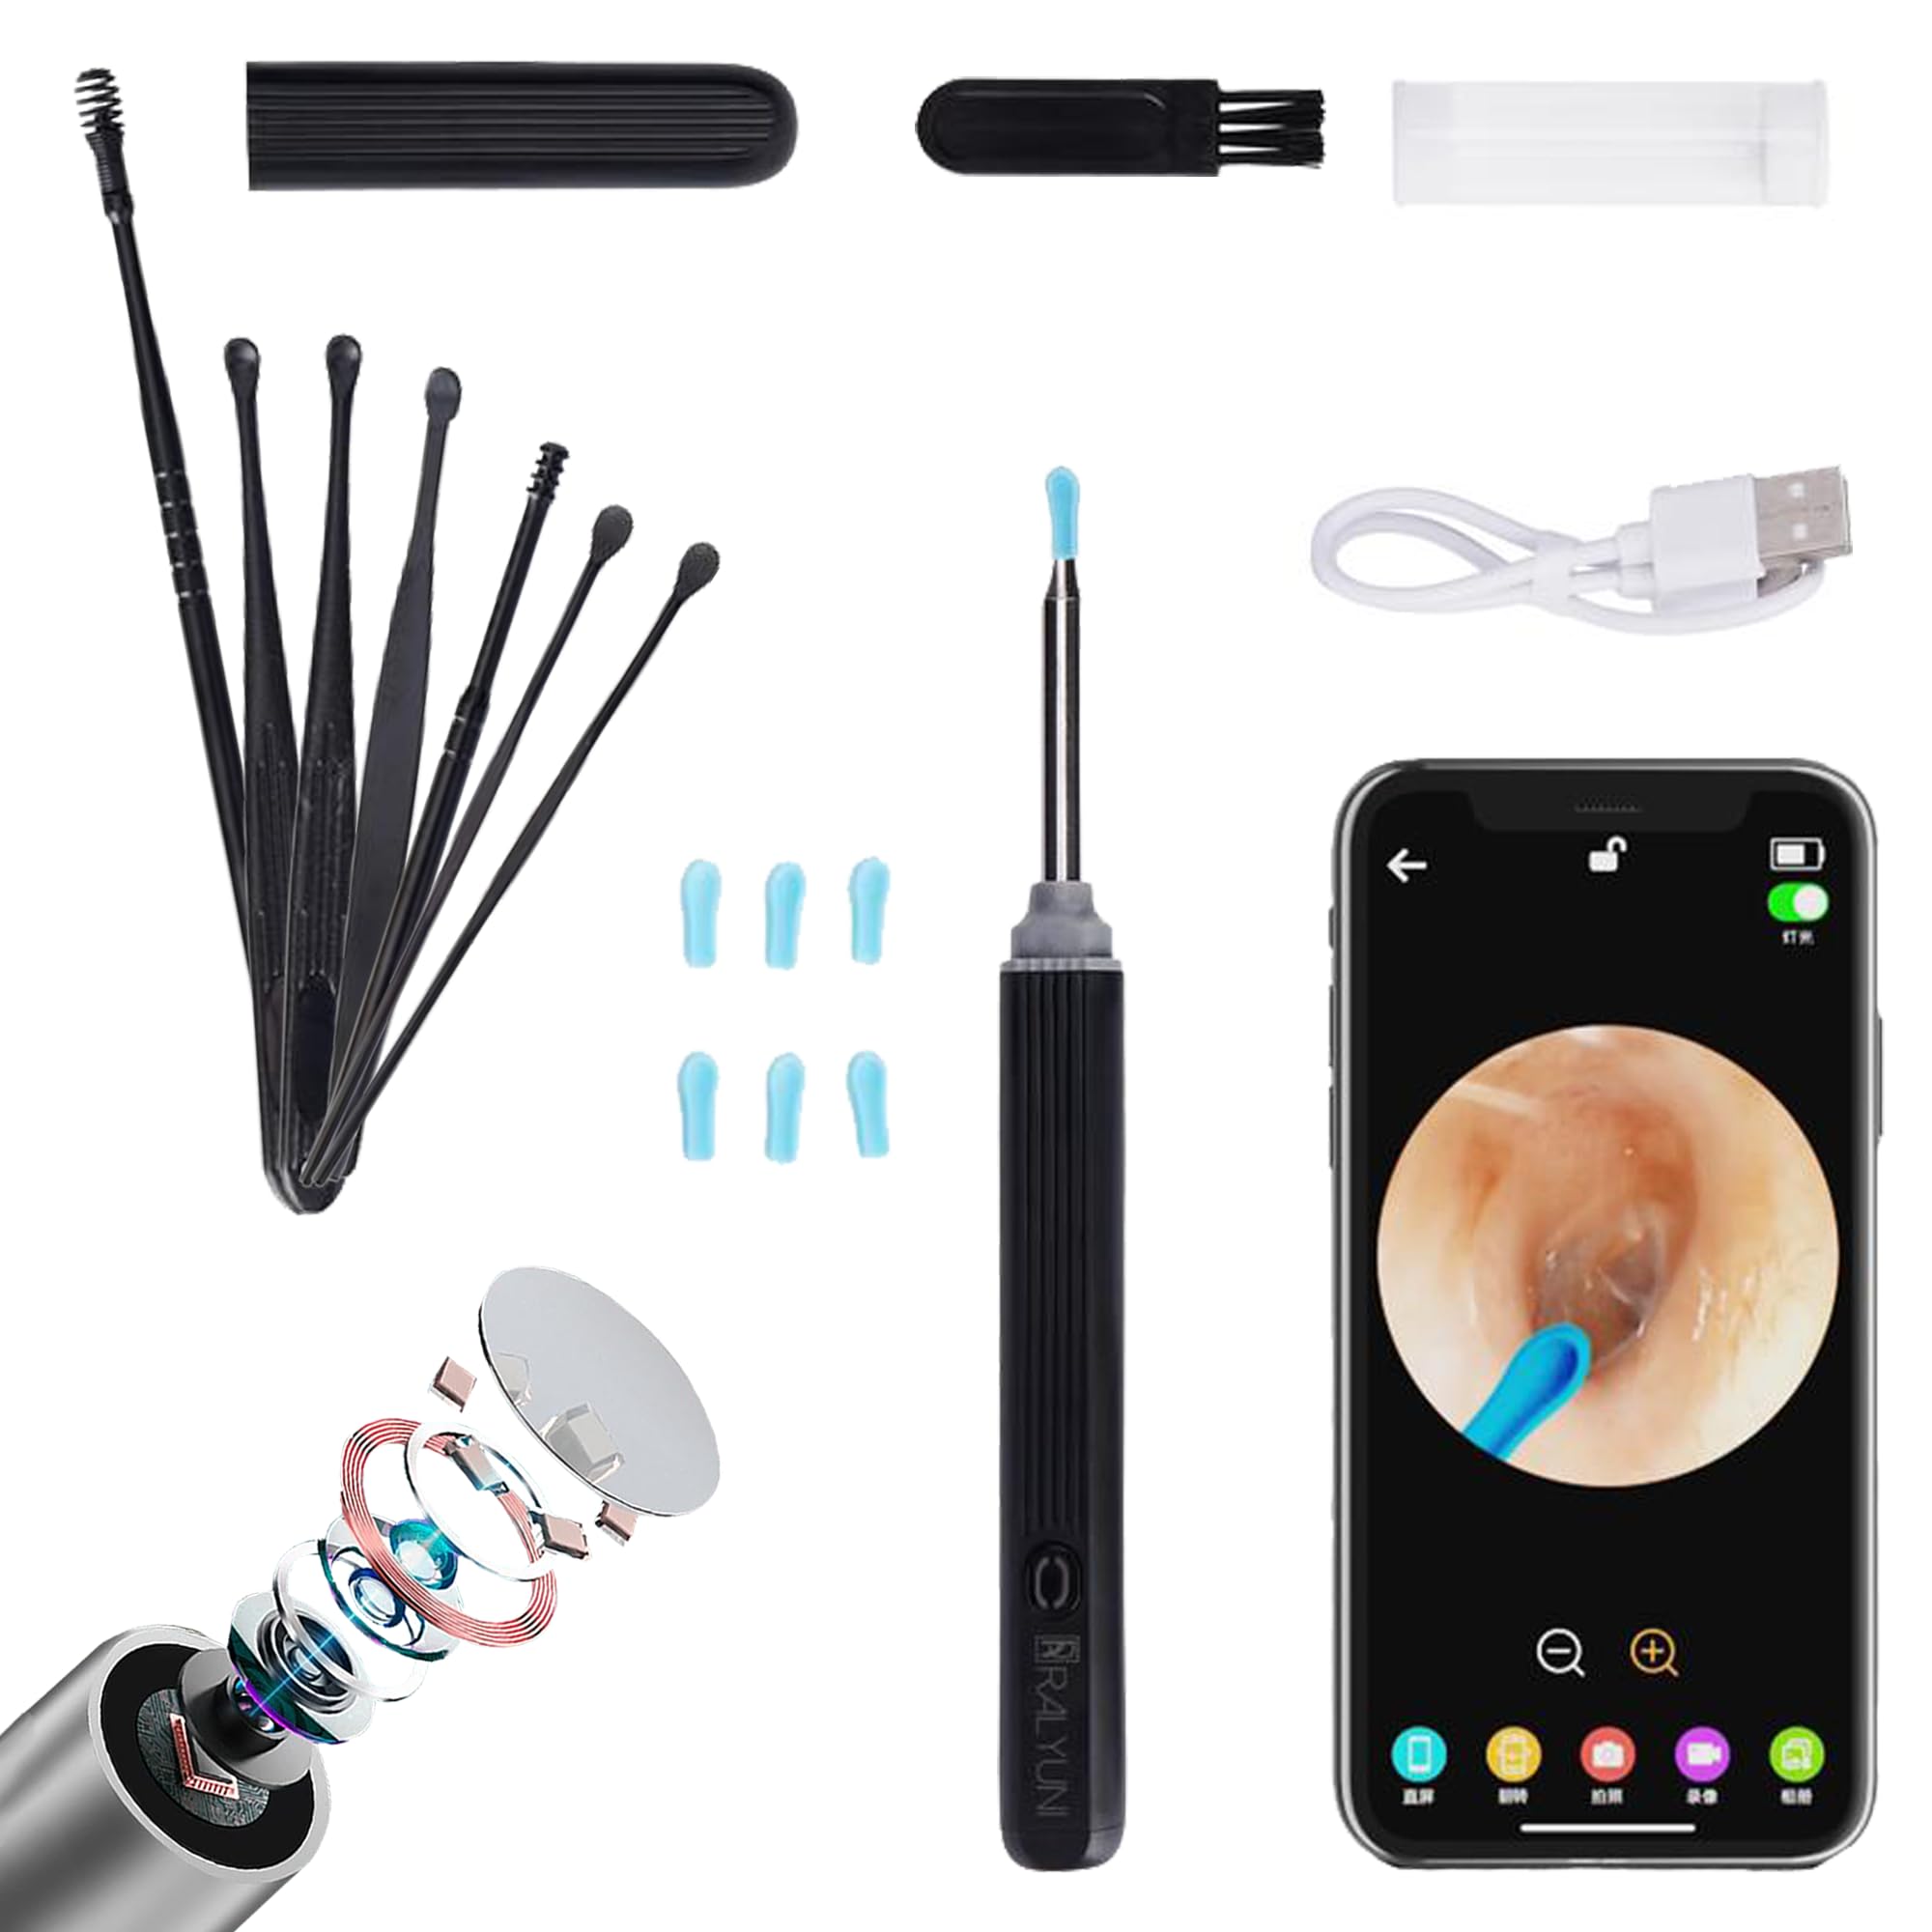 Ear Wax Removal with Camera and Light Ear Cleaner - Ear Wax Removal Tool Ear Cleaning Kit for iPhone, iPad, Android Phones